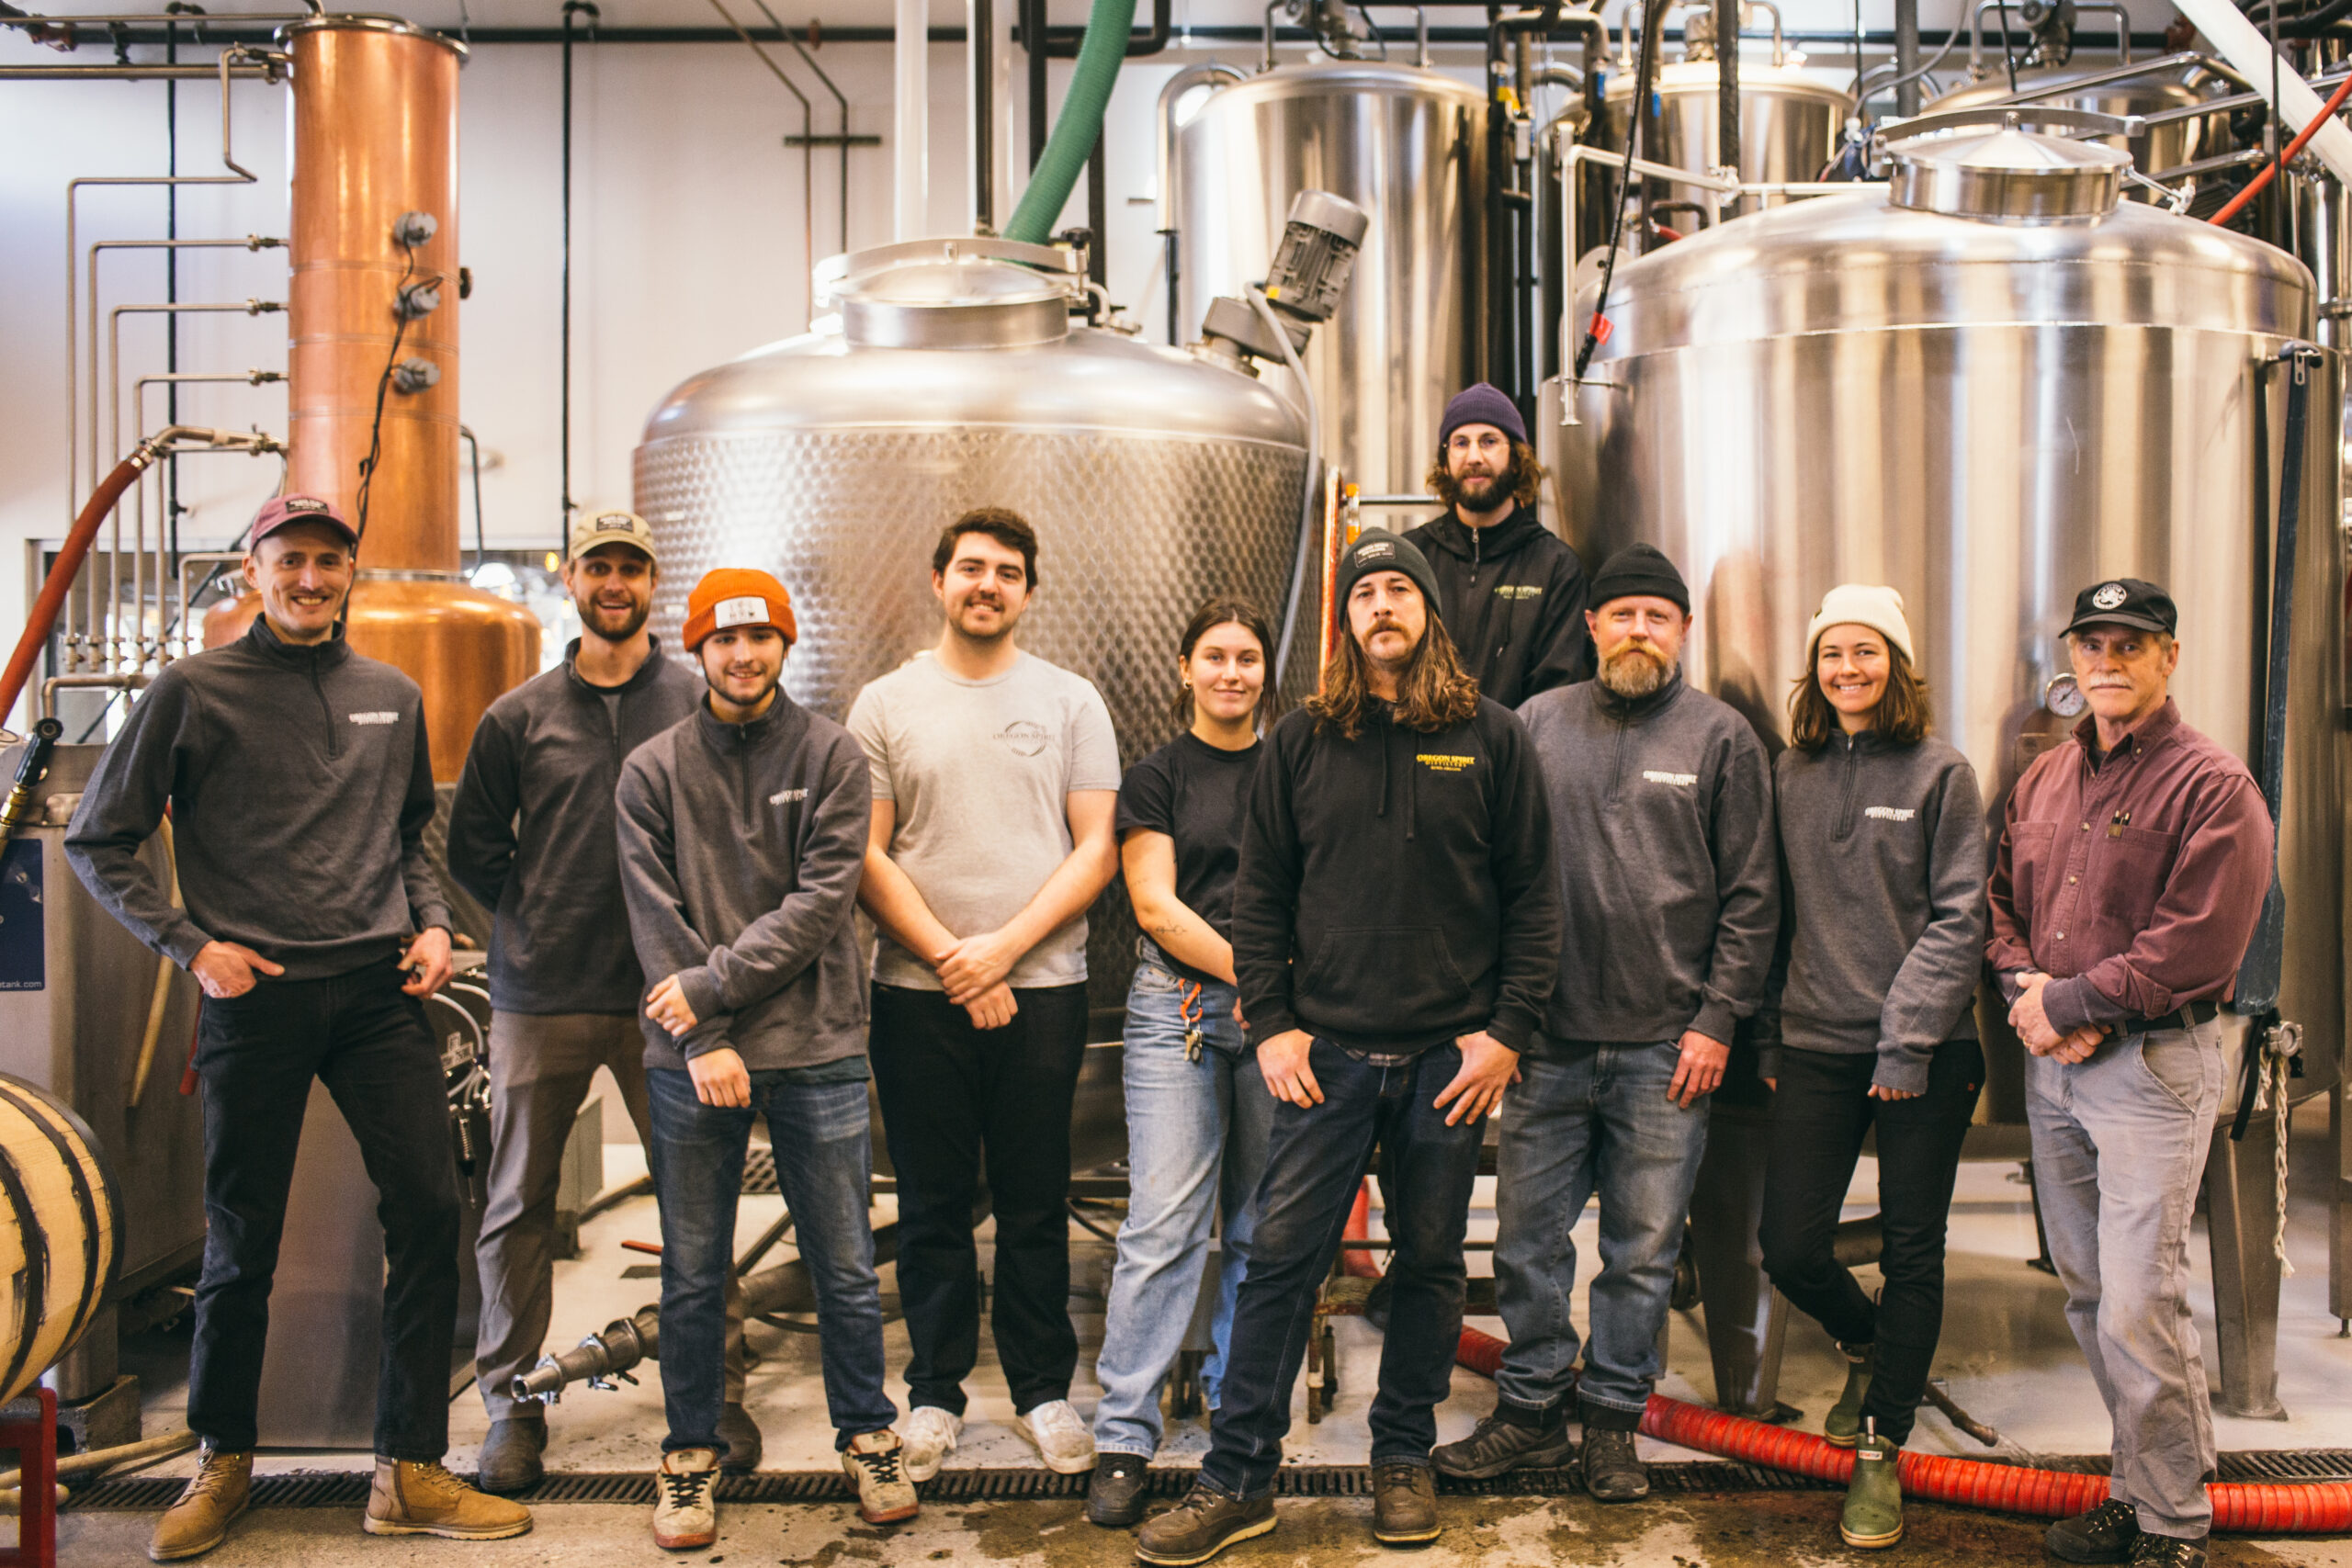 The Oregon Spirit Production team stands in front of the distillery equipment